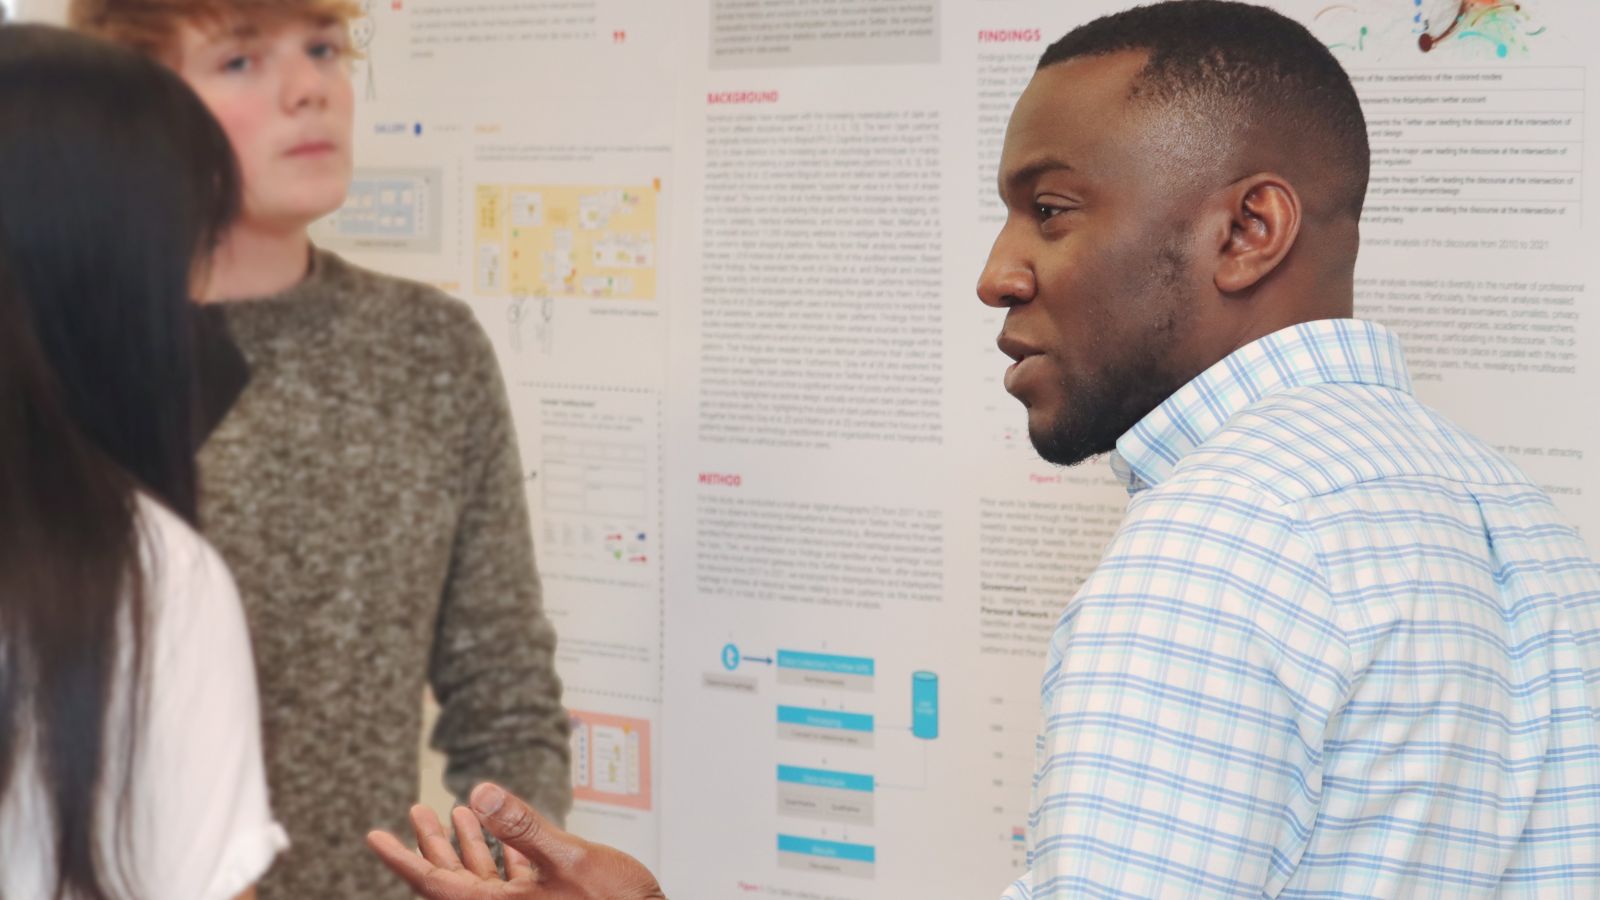 Ike Obi (right), graduate research assistant in the Department of Computer Graphics Technology, discusses research projects during a poster session at Stewart Center. (Purdue University photo/John O'Malley)